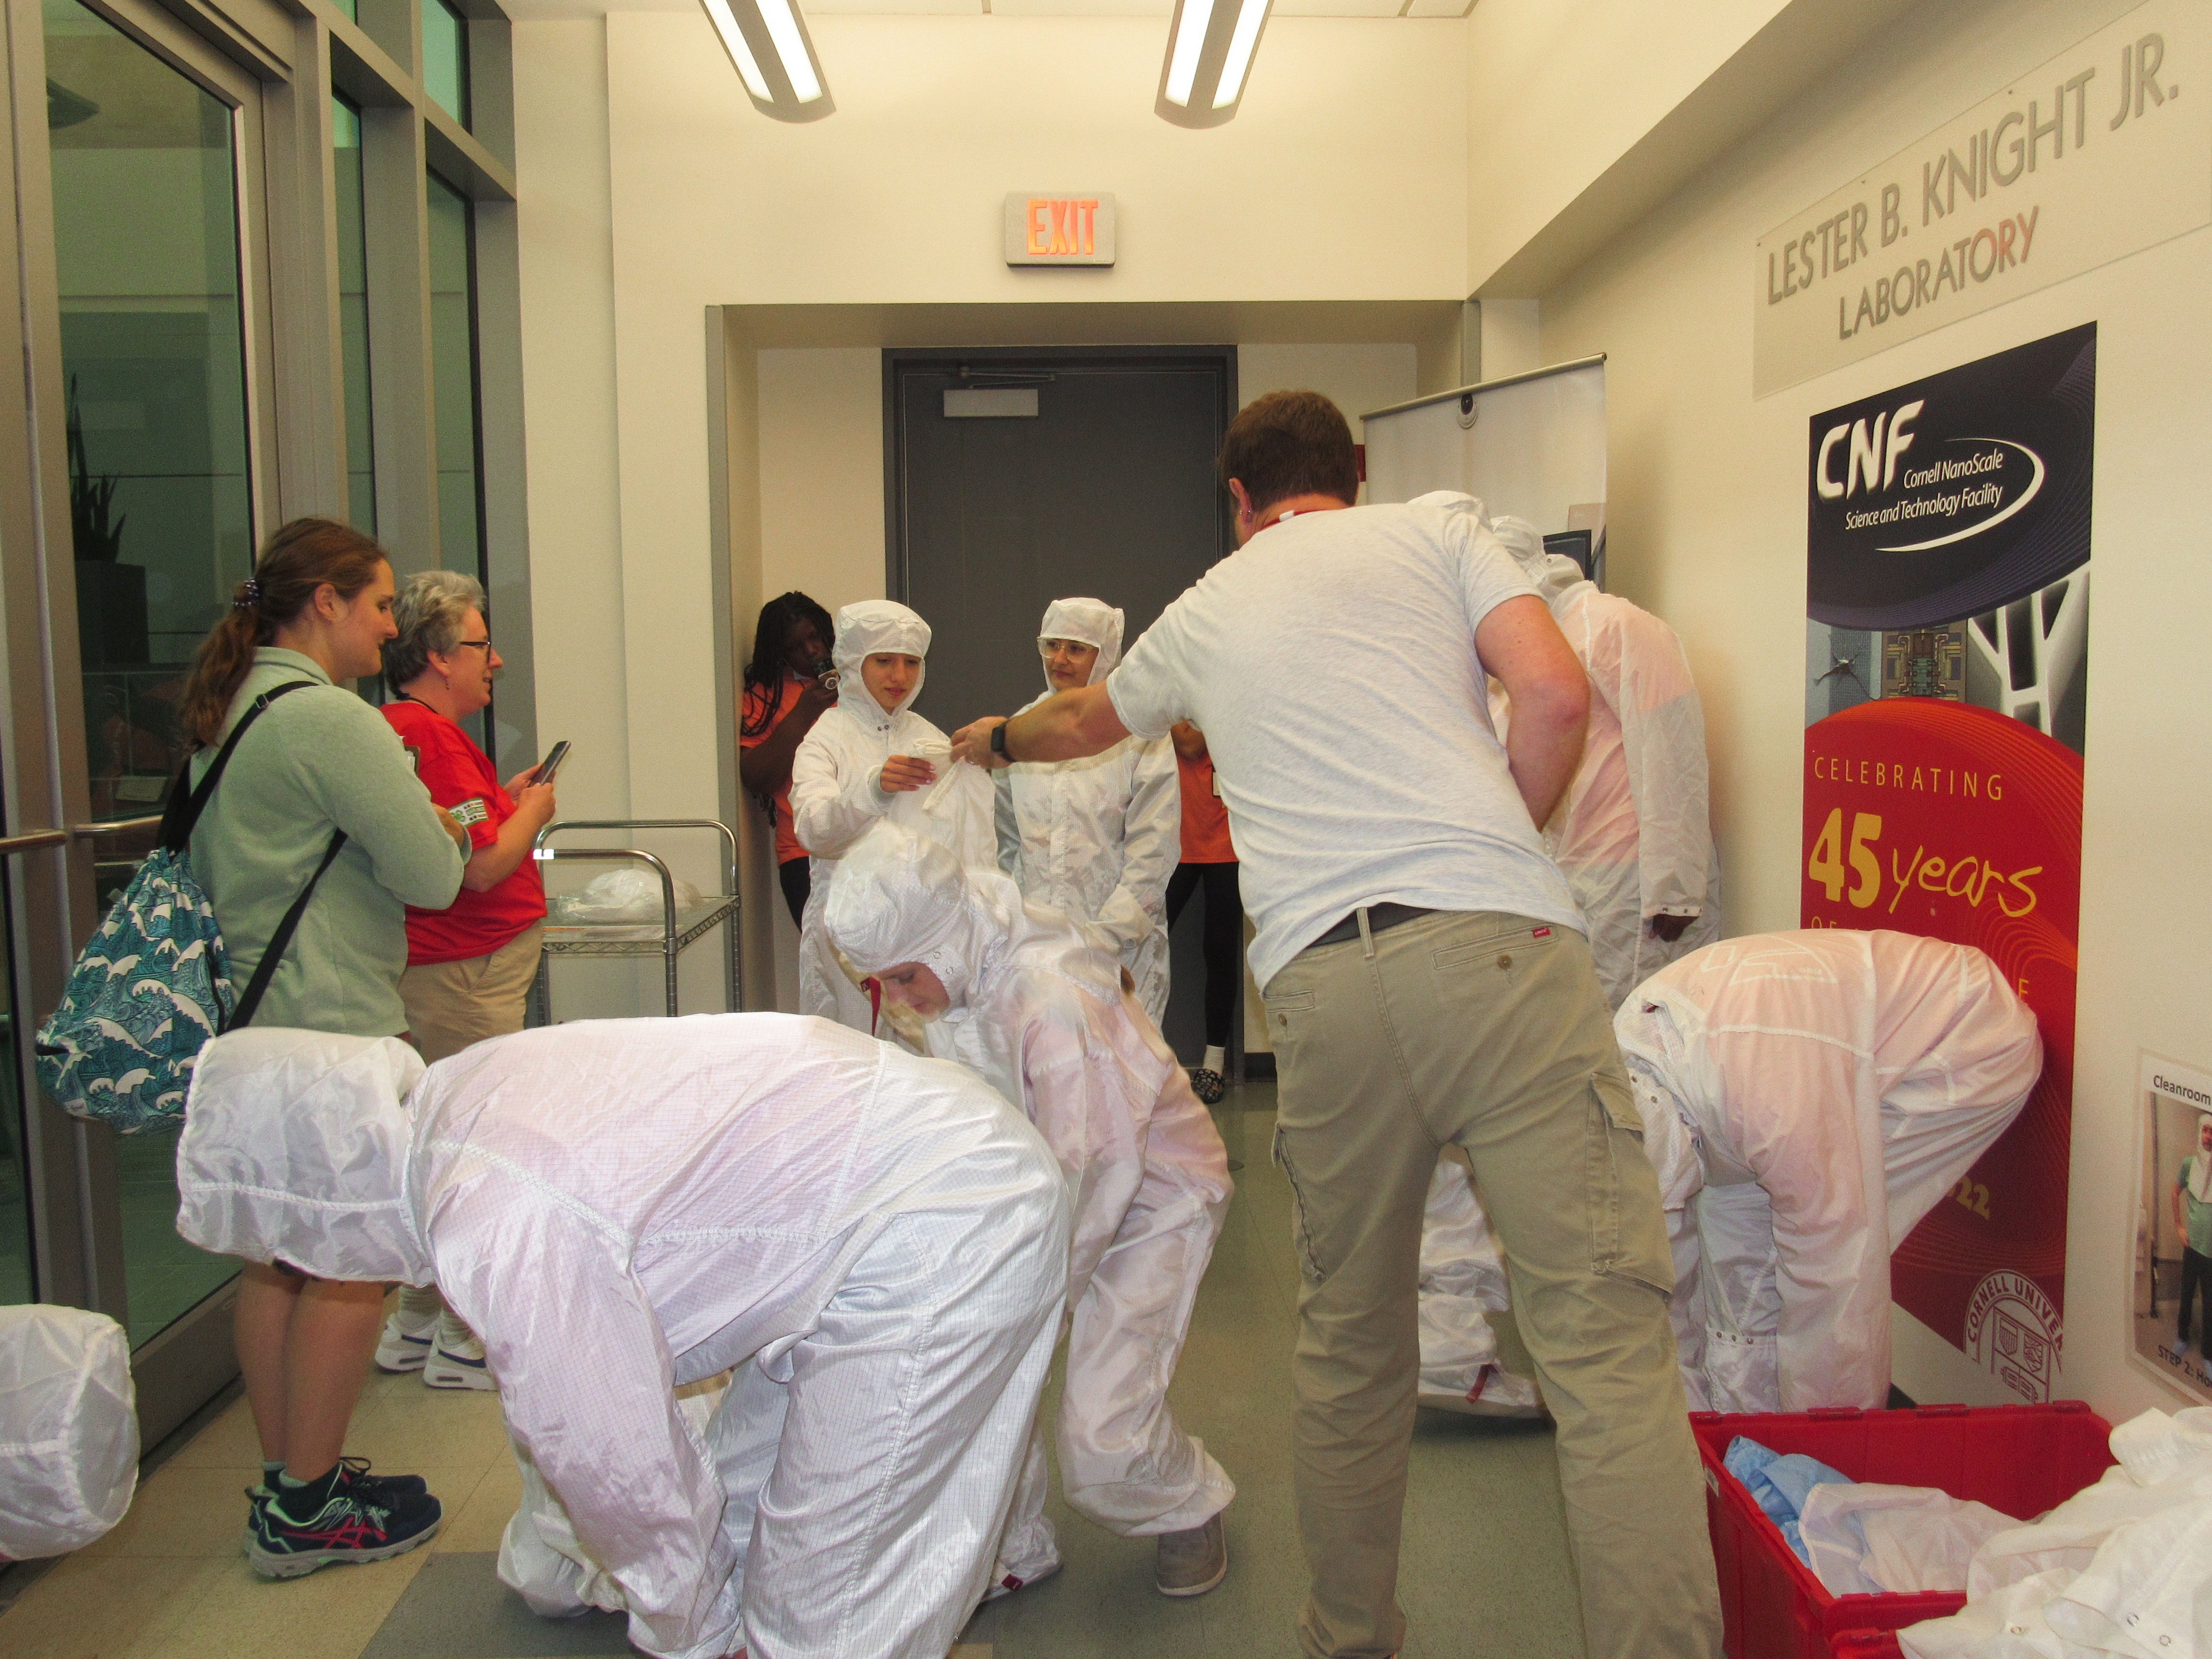 Pennell passes students Tyvek coveralls